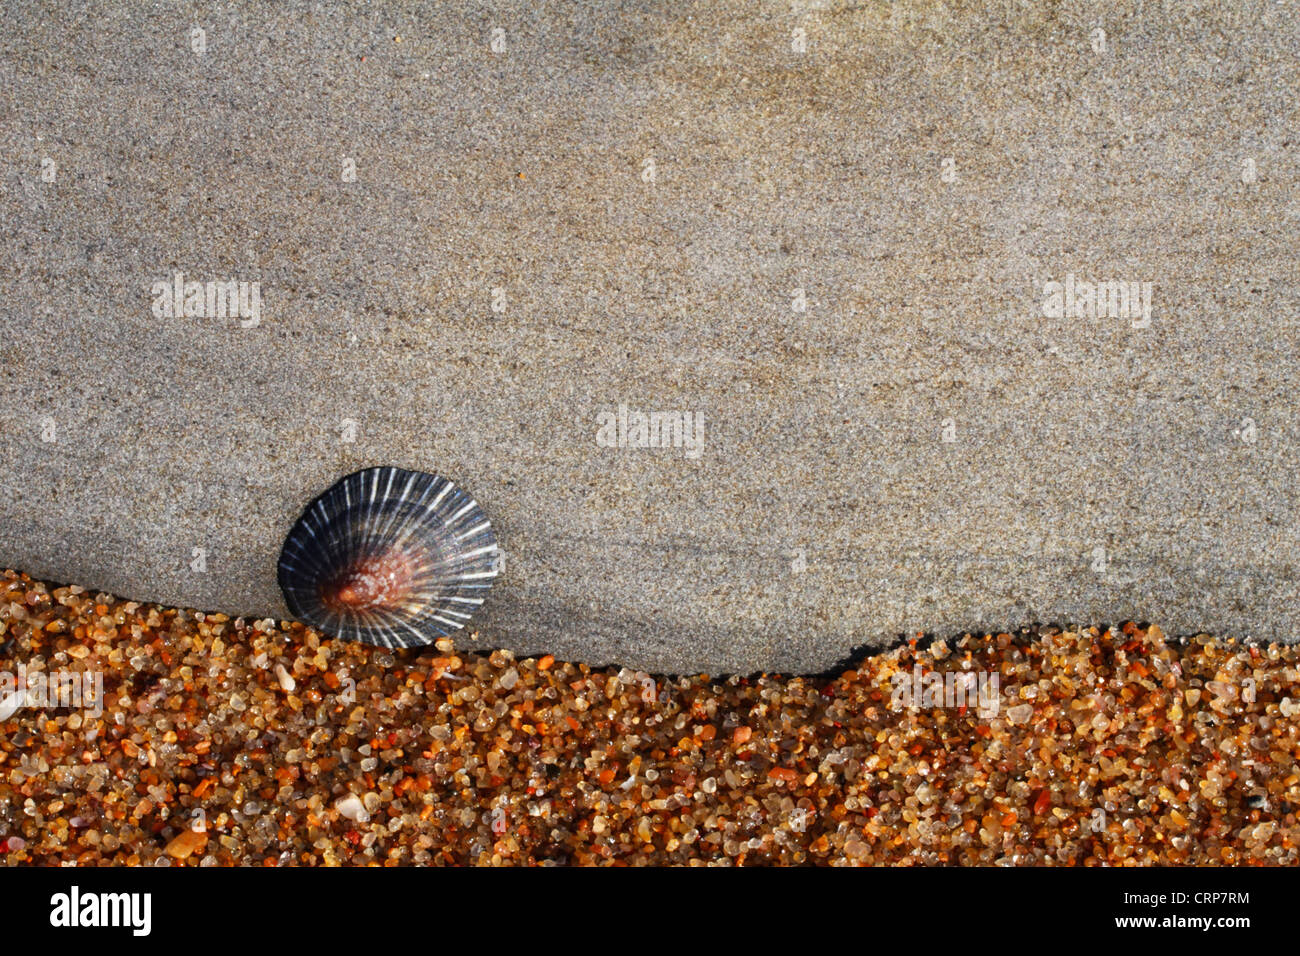 A limpet attached to rock in an intertidal zone Stock Photo